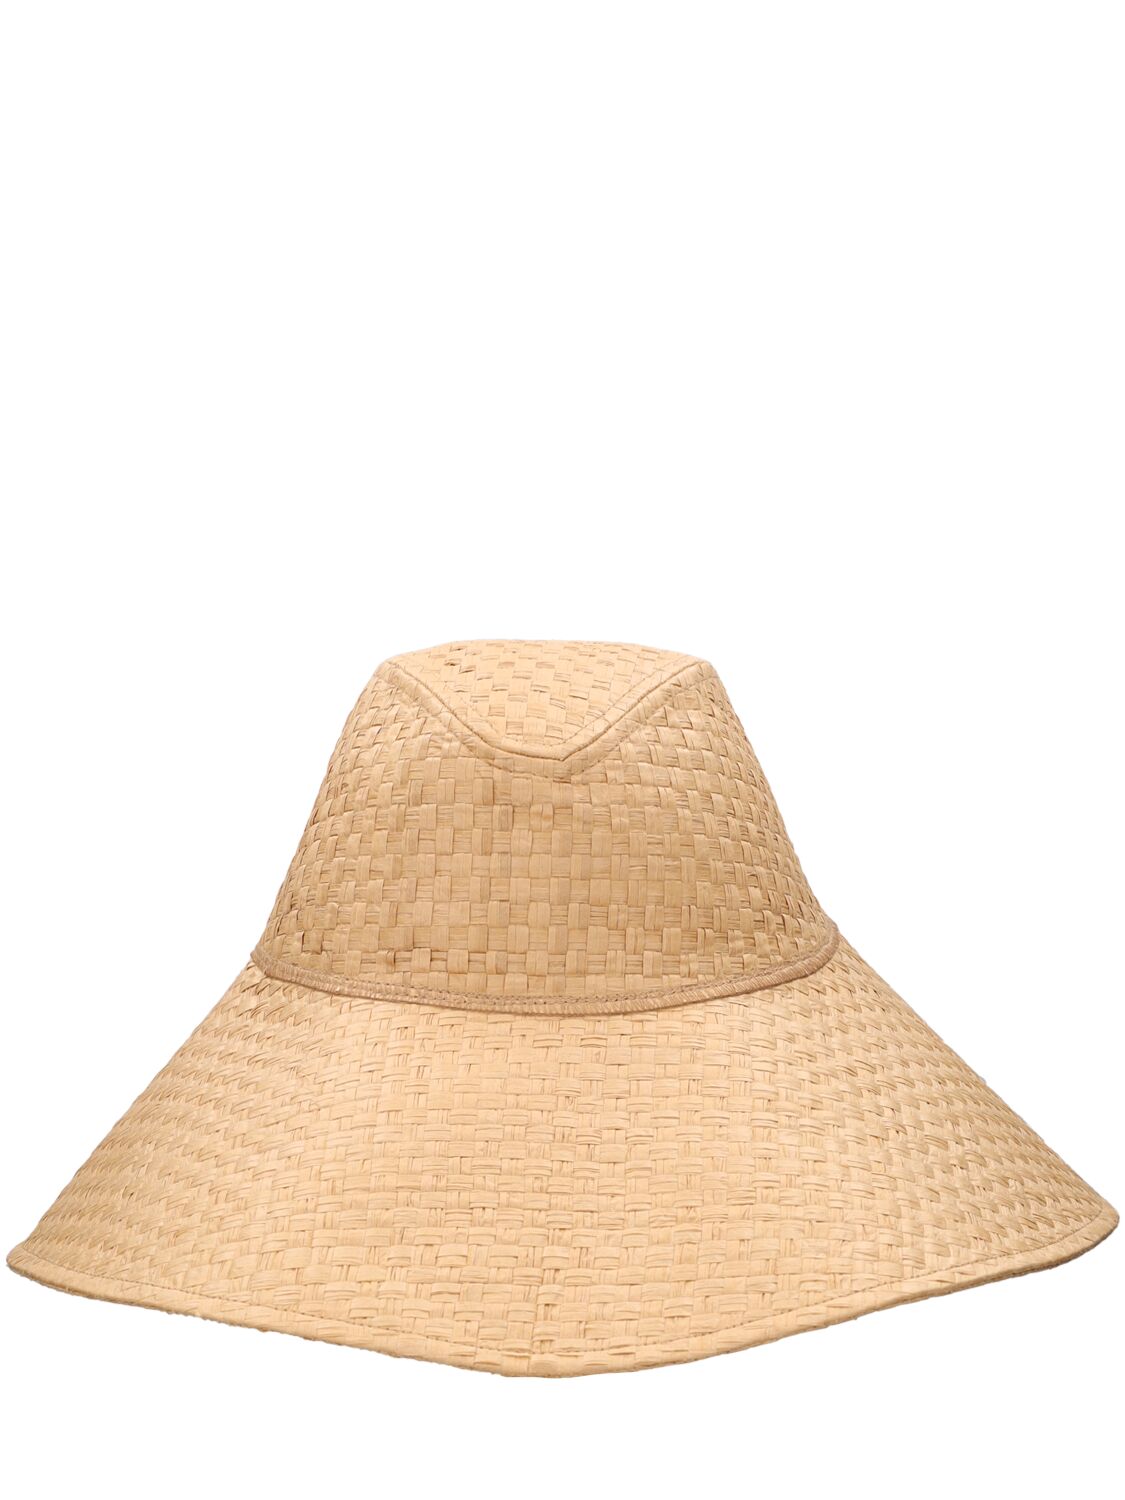 The Cove Woven Straw Hat